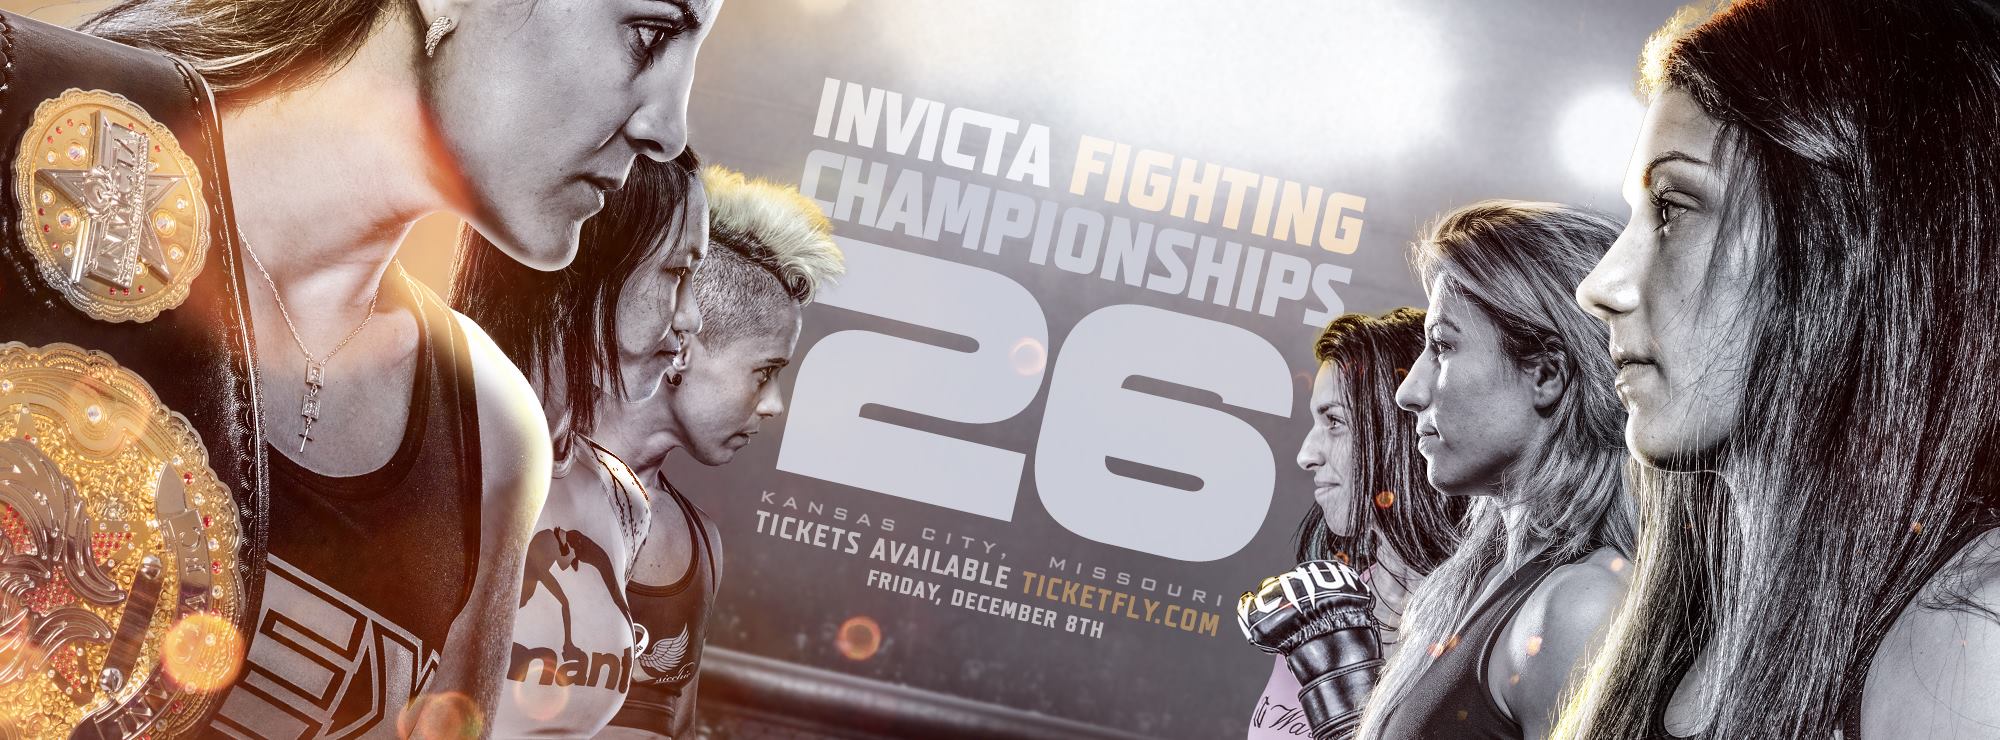 Invicta FC 26 Live Play By Play Fight Results